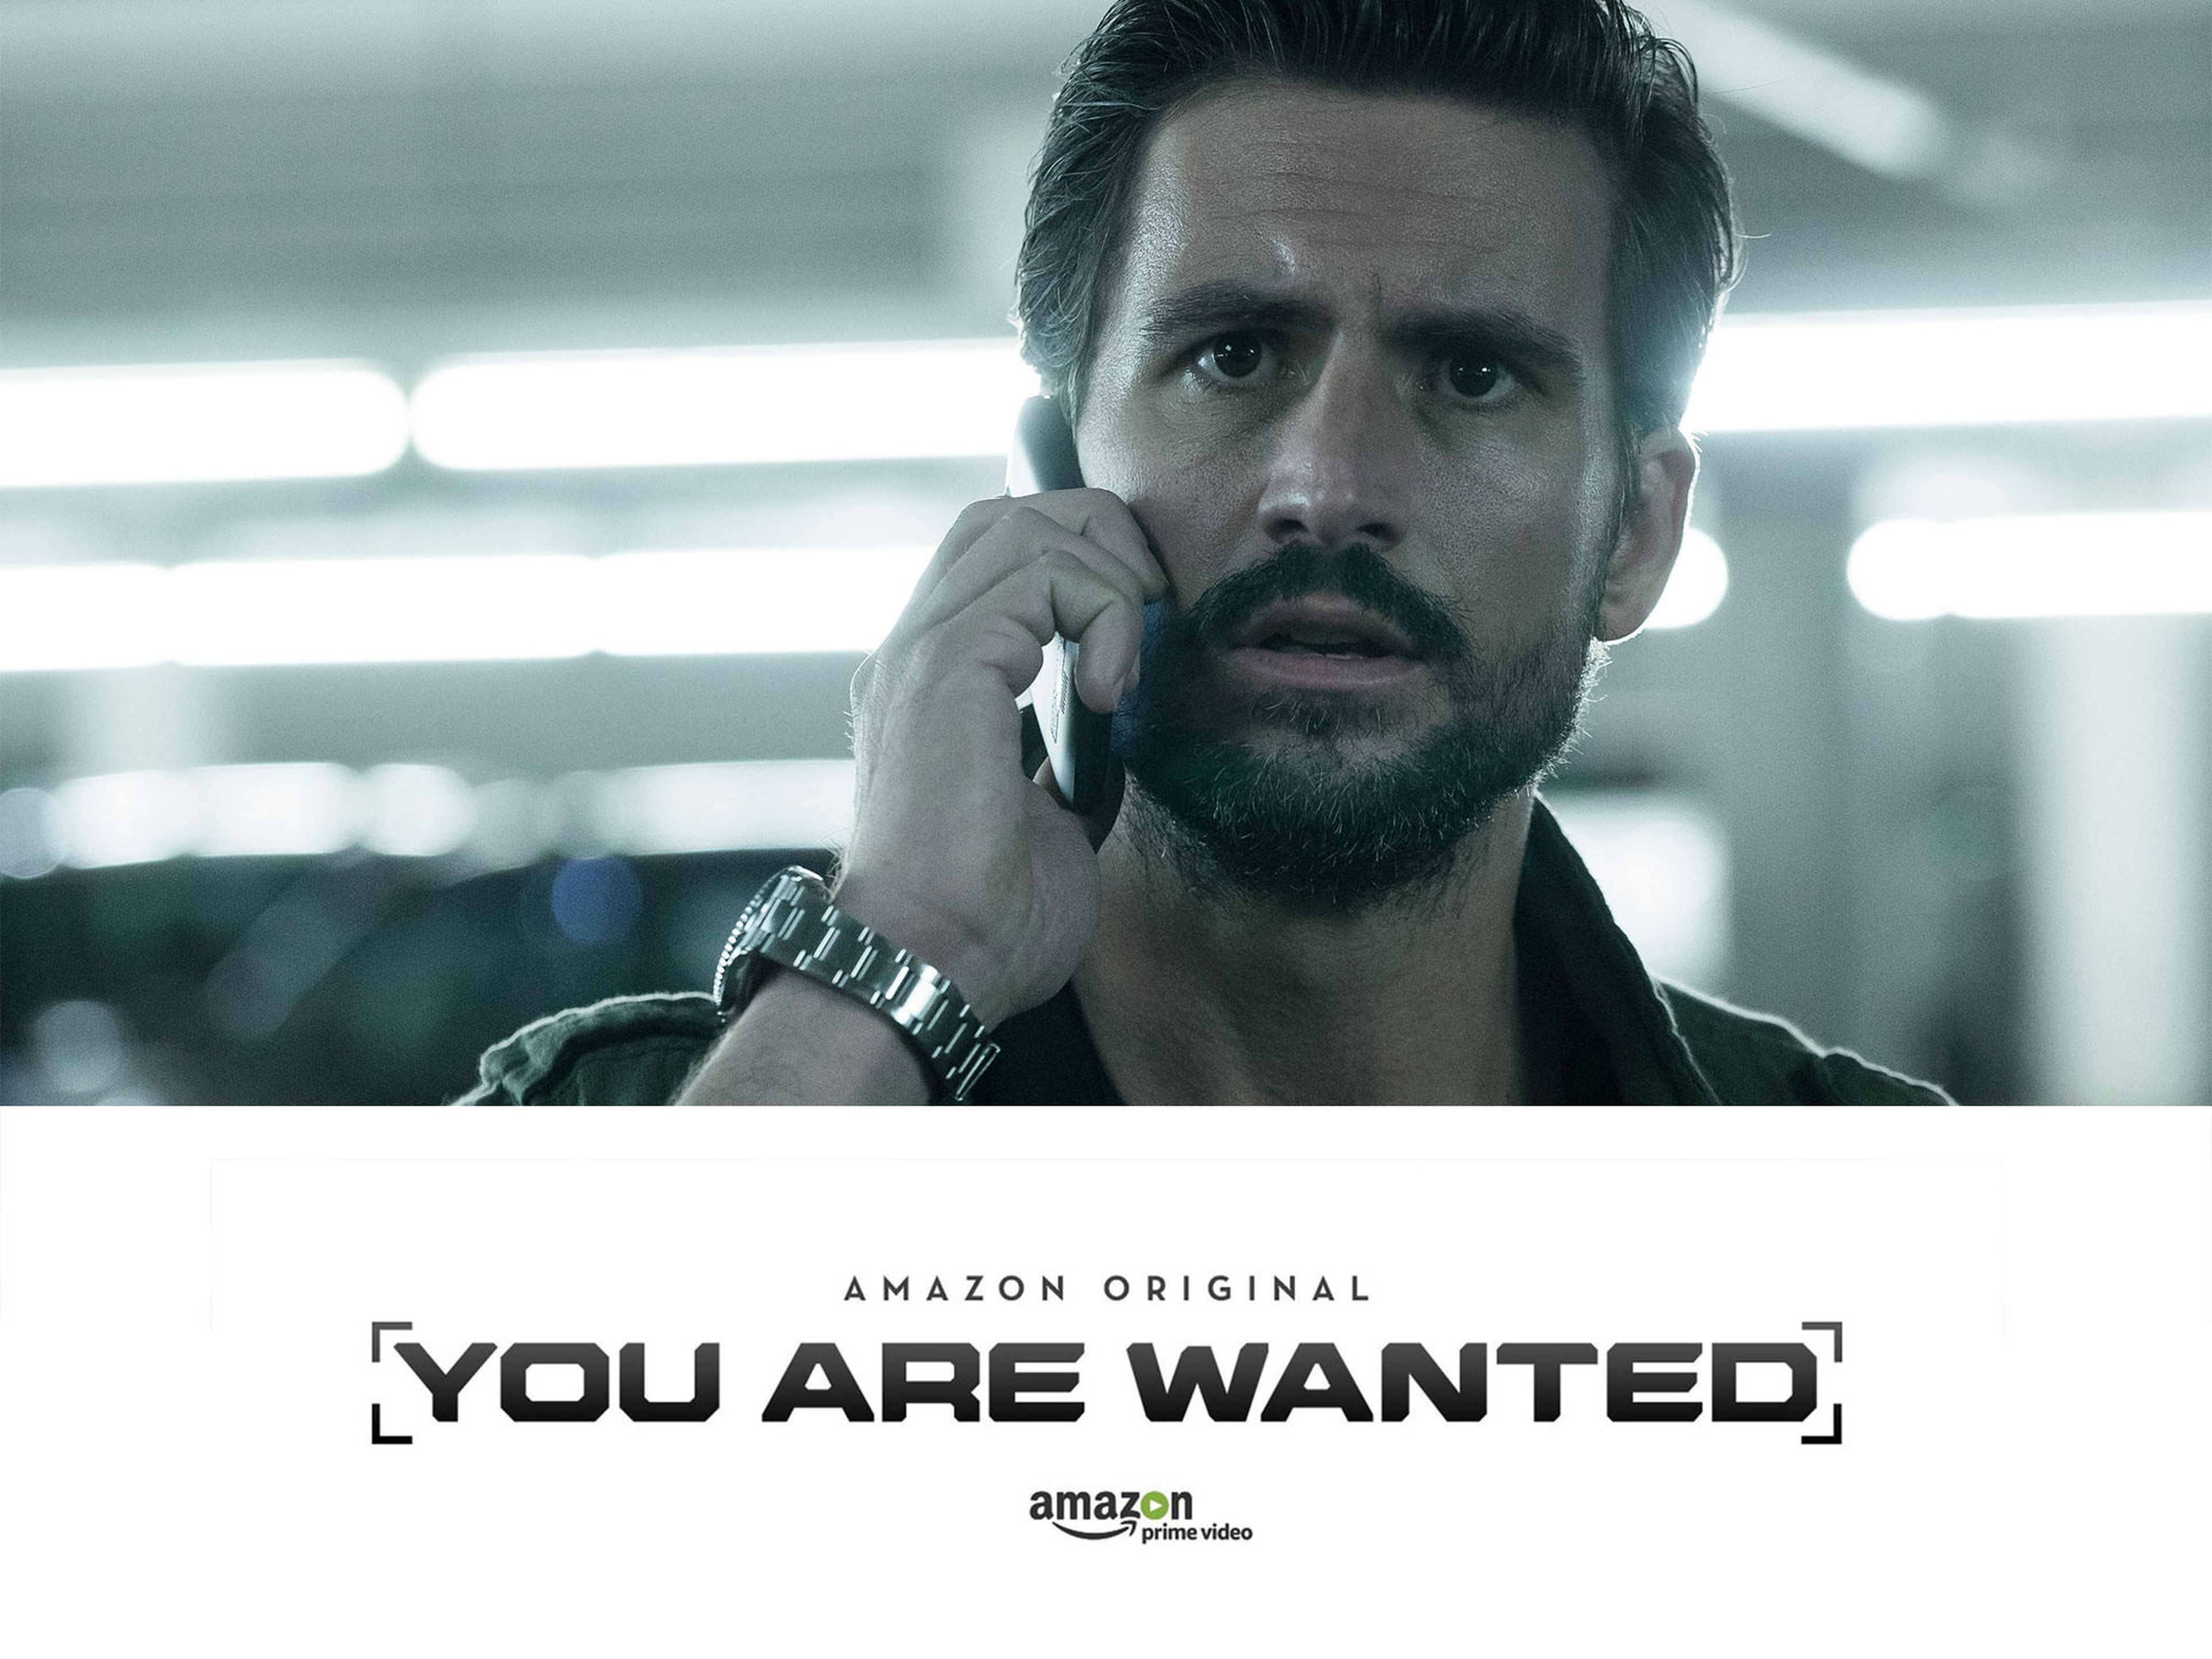 The best opportunity to try out these sweet potato pizzas is March 17th. Then, "You Are Wanted," Amazon's first German series production, is released.